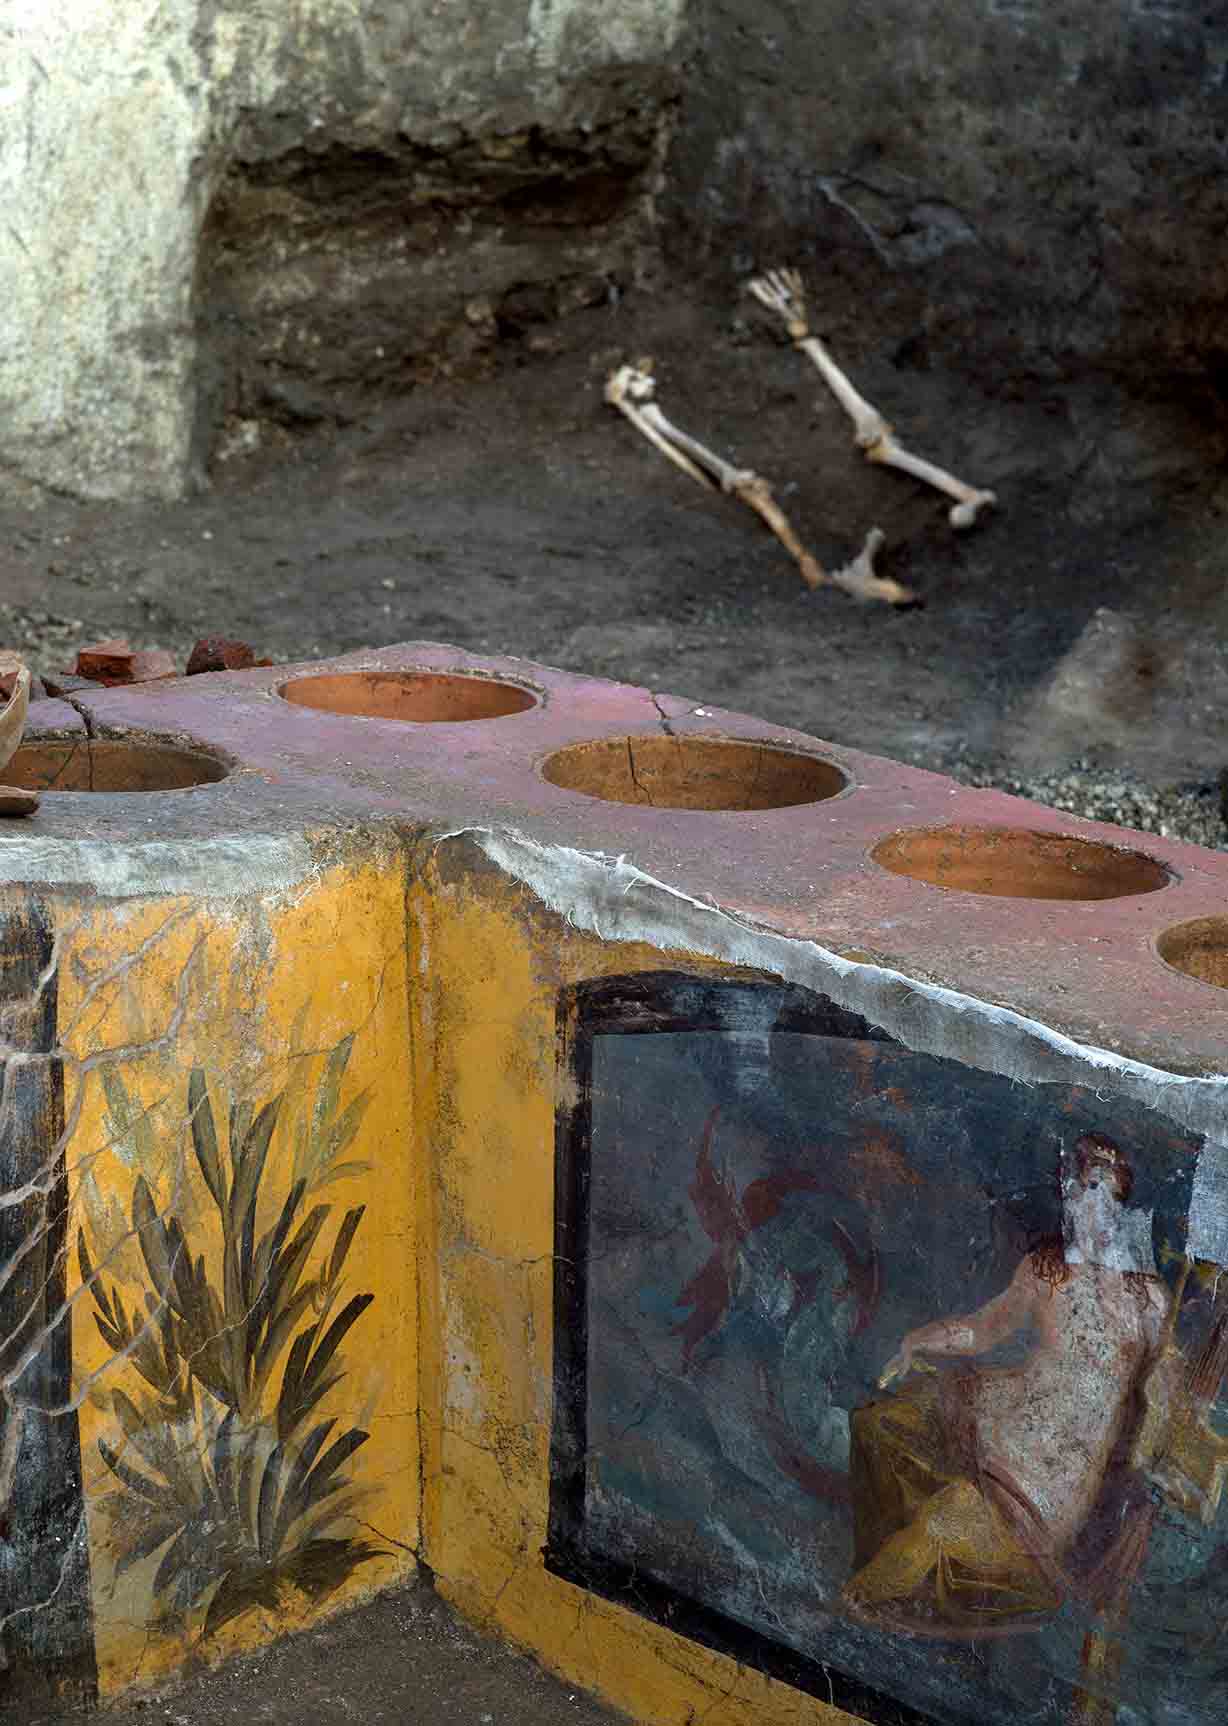 The remains of one of the individuals at the top of this image, who was discovered on a bed in the back of a room at the amazing Pompeii food stall found in March 2019 AD at the Regio V site. (Pompeii Archaeological Park)